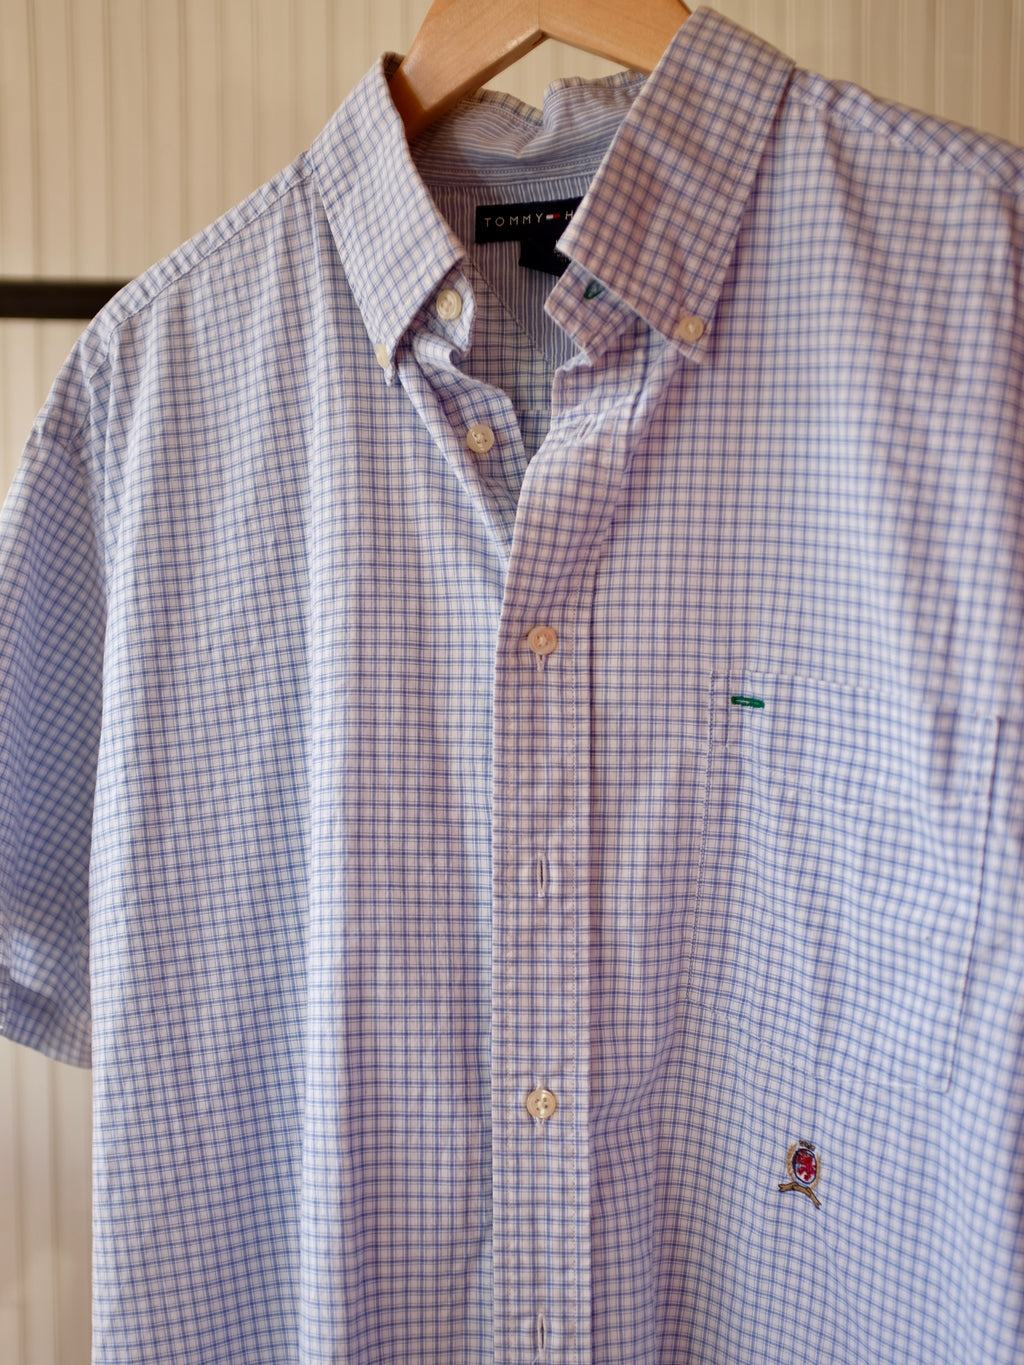 Tommy S/S Shirt - LG